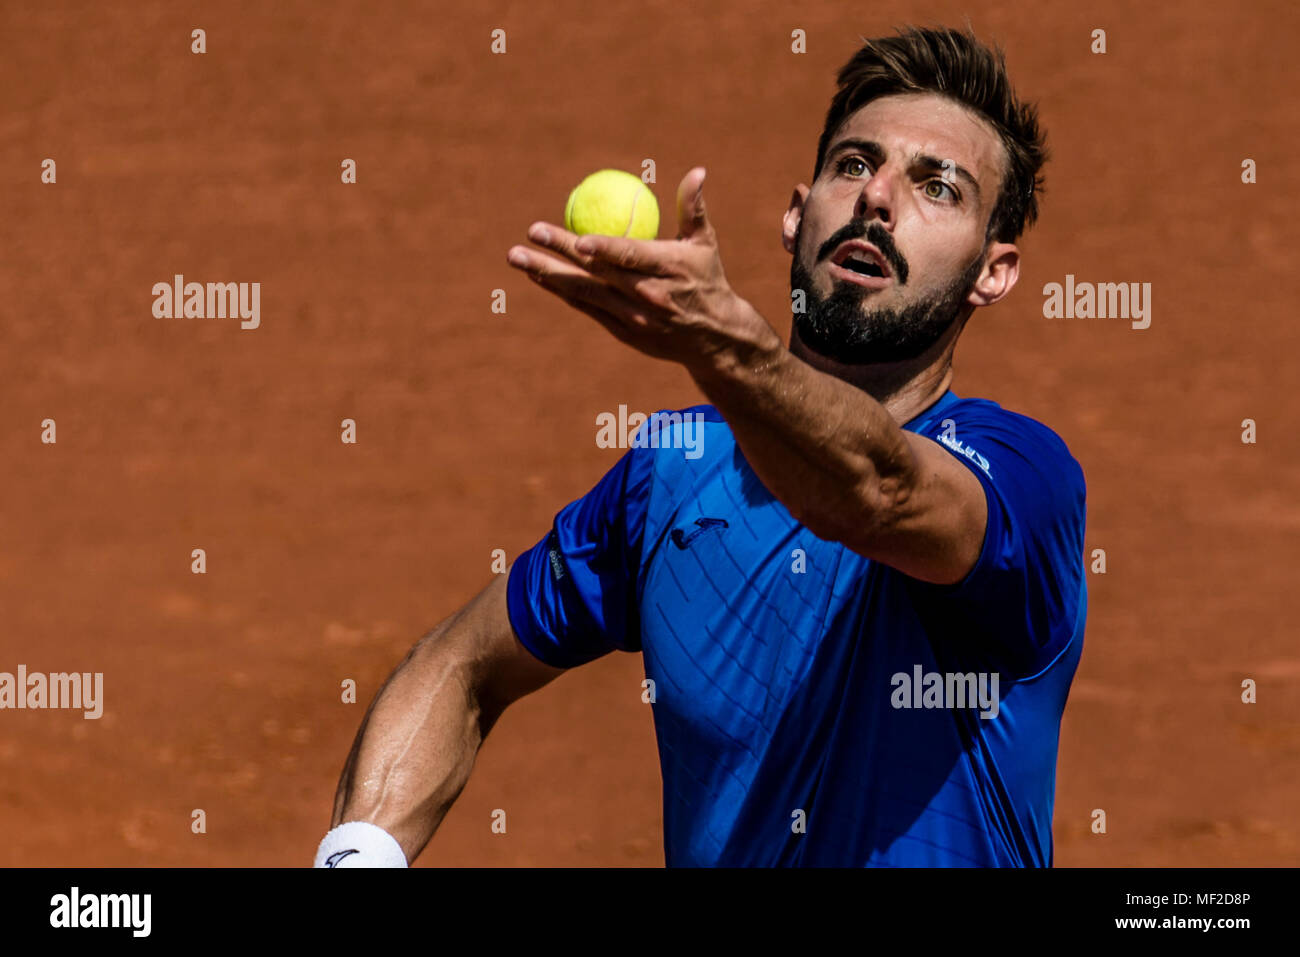 Barcelona, Spain. 24 April, 2018:  MARCEL GRANOLLERS (ESP)  serves against David Goffin (BEL) during Day 2 of the 'Barcelona Open Banc Sabadell' 2018. 4:6, 7:6, 6:2 Credit: Matthias Oesterle/Alamy Live News Stock Photo